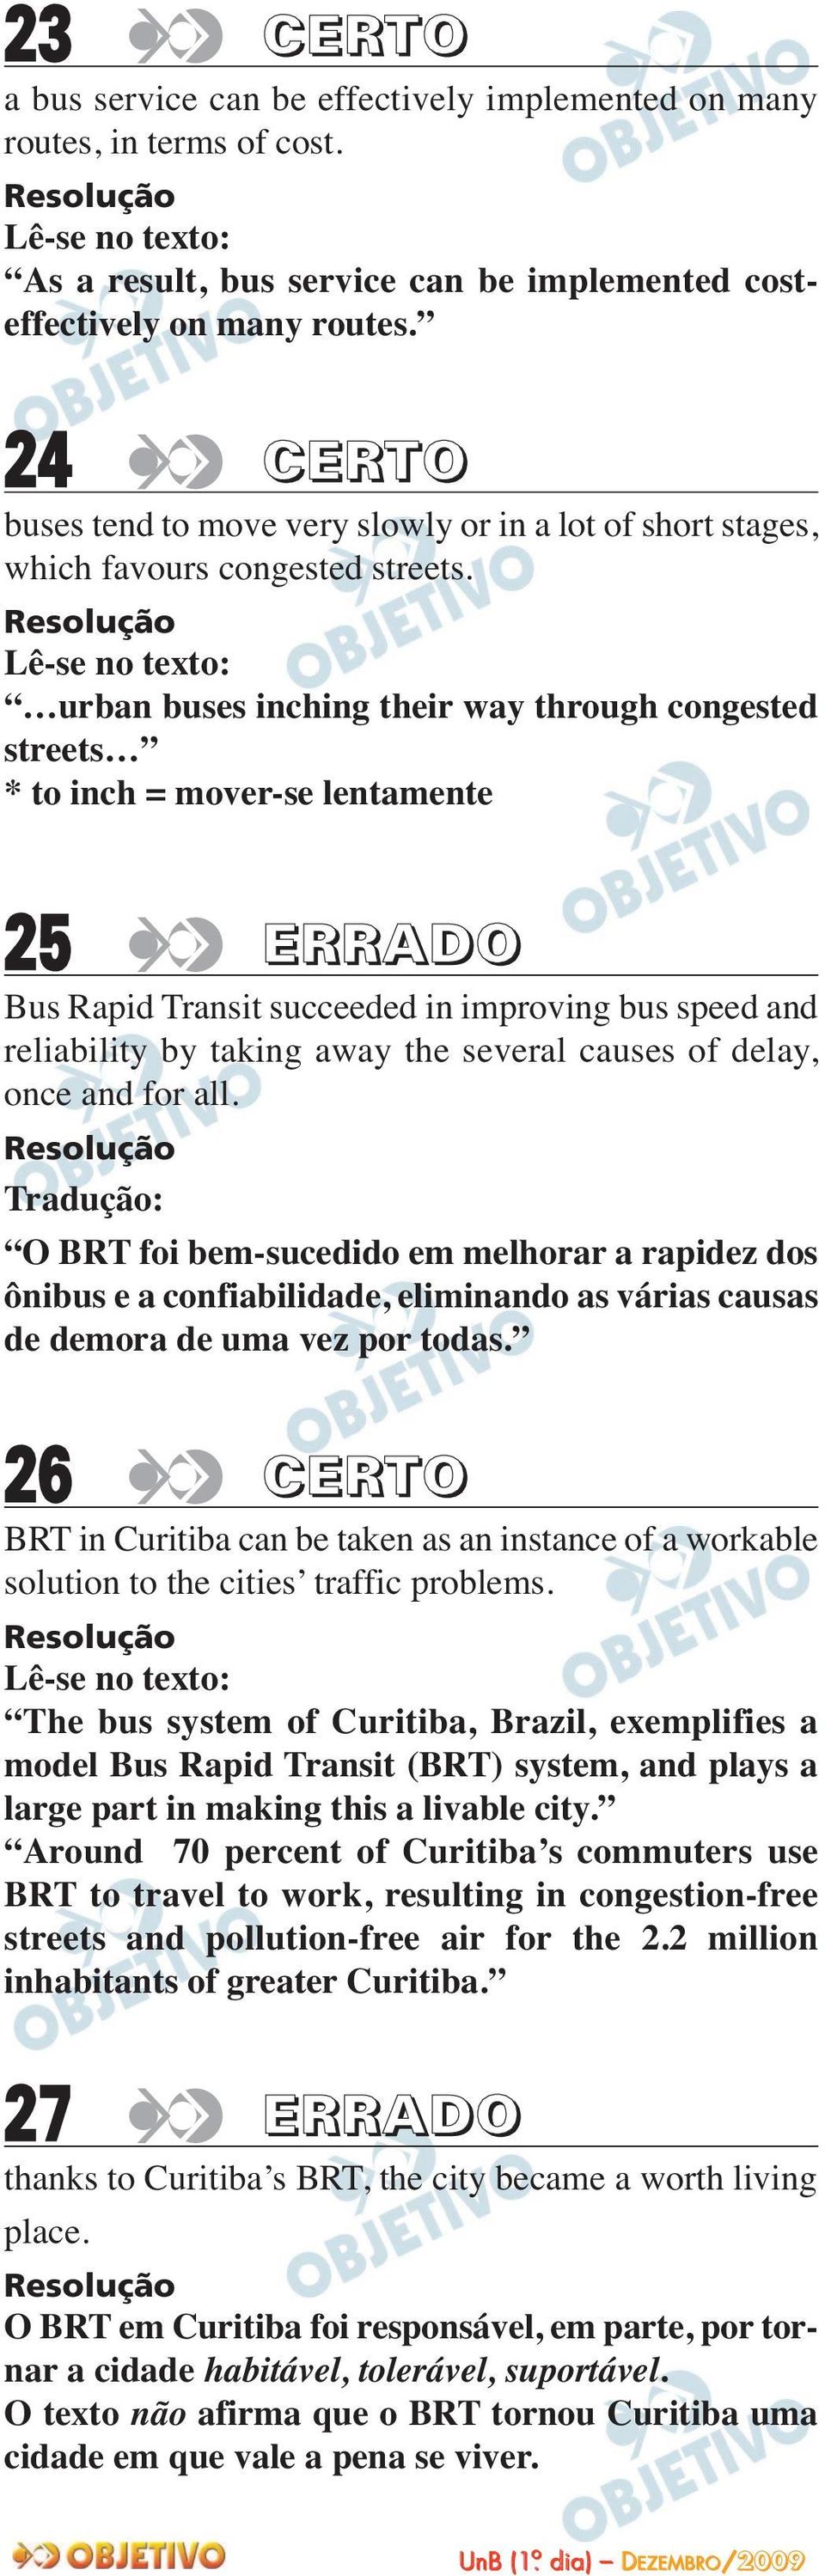 Lê-se no texto: urban buses inching their way through congested streets * to inch = mover-se lentamente 25 ERRADO Bus Rapid Transit succeeded in improving bus speed and reliability by taking away the